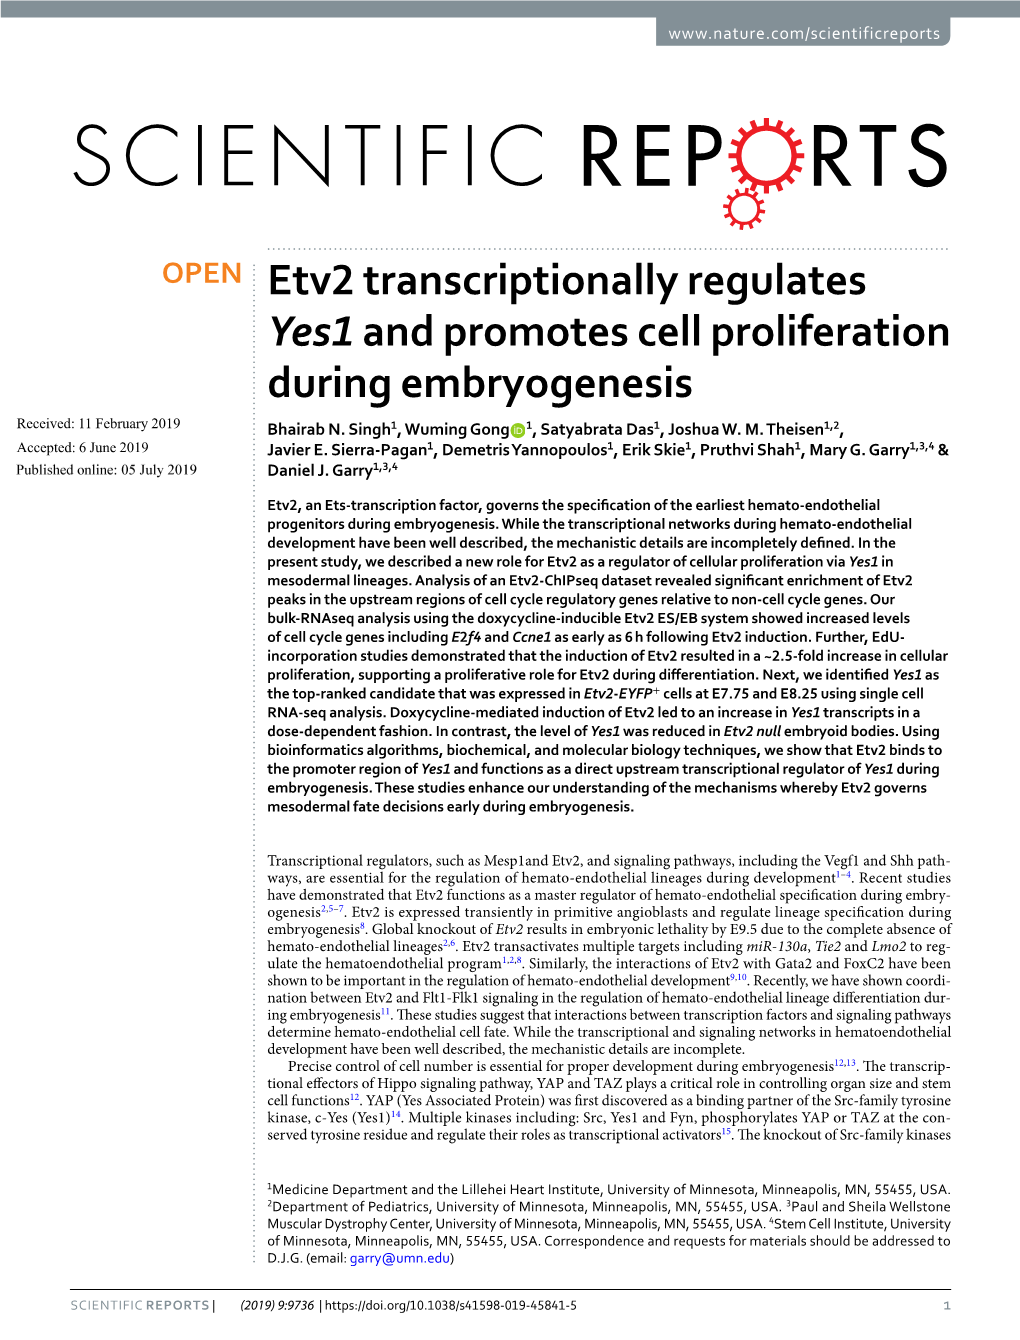 Etv2 Transcriptionally Regulates Yes1 and Promotes Cell Proliferation During Embryogenesis Received: 11 February 2019 Bhairab N